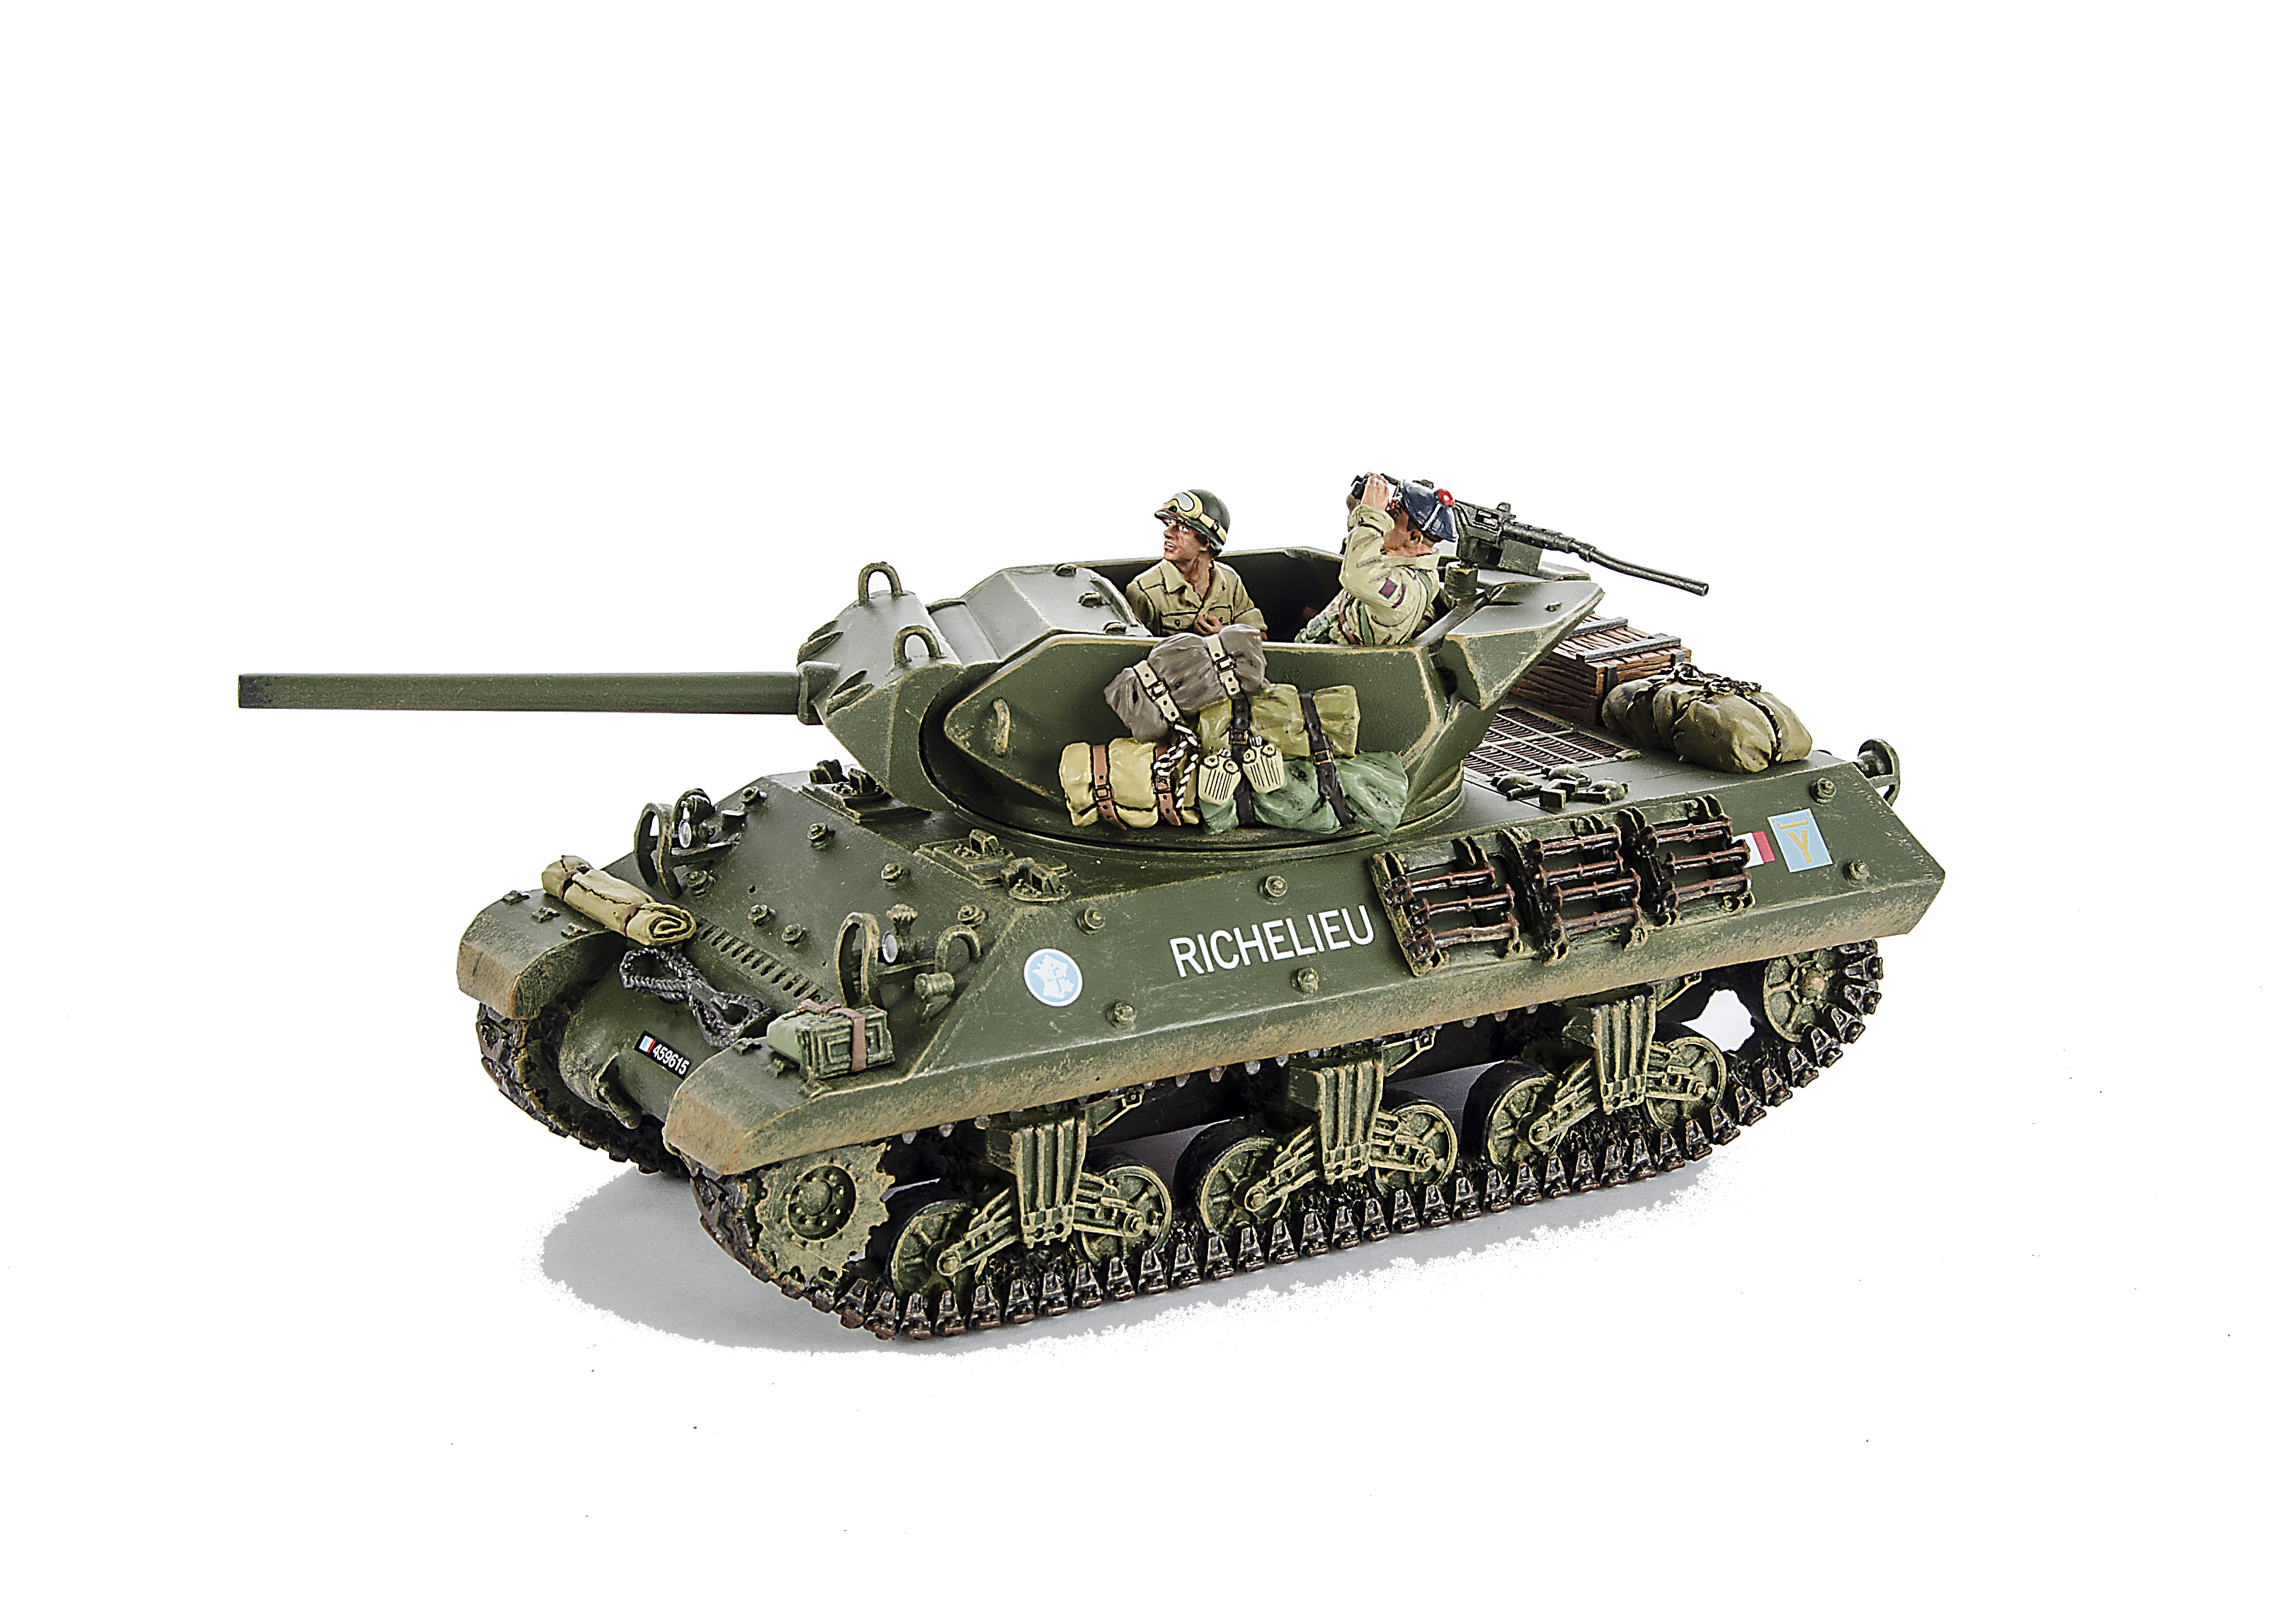 King & Country D Day series Free French forces DD101 M10 Tank Destroyer, generally VG, m/c gun